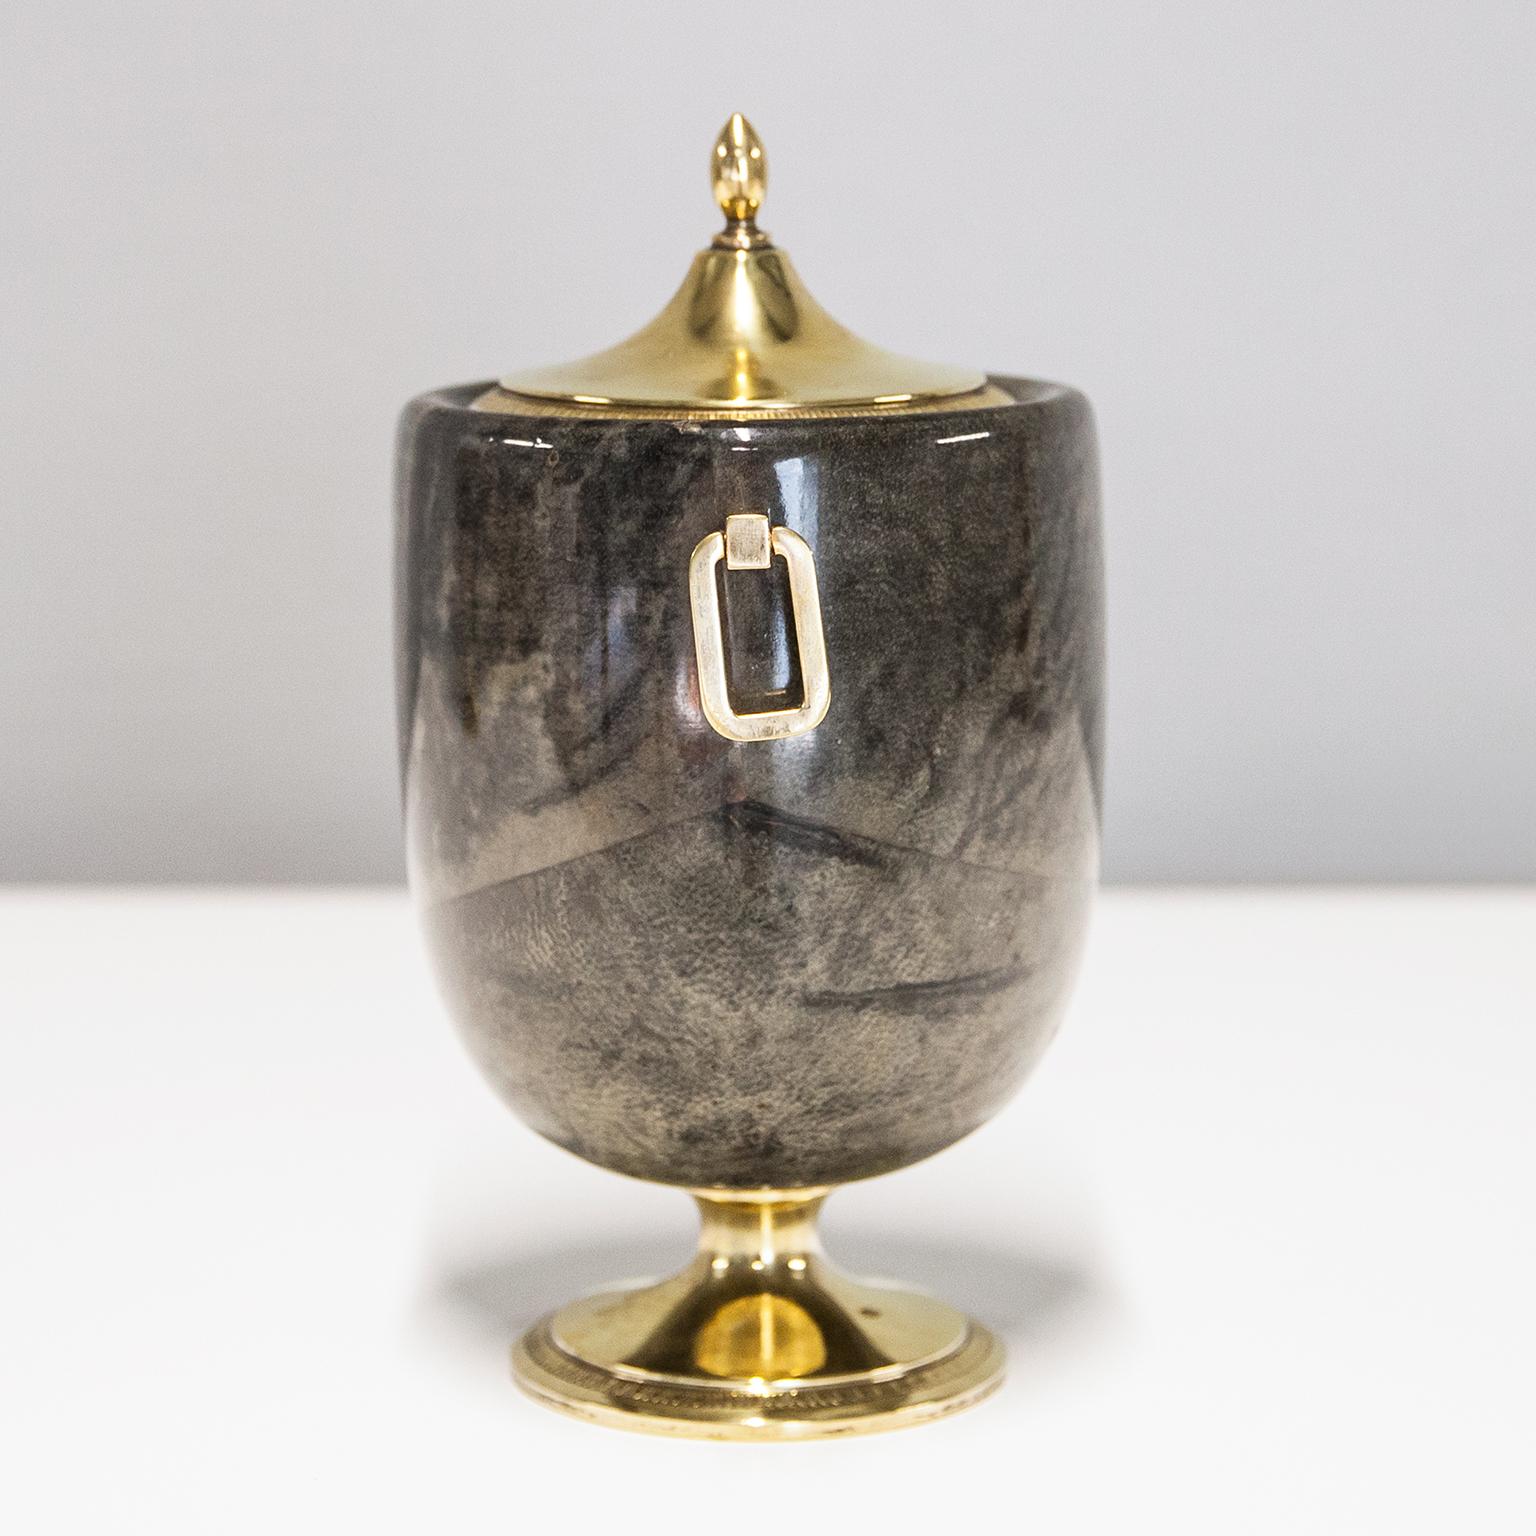 Wonderful ice bucket by Aldo Tura in grey brown parchment and a glass inlay, in excellent vintage condition.
Along with artists like Piero Fornasetti and Carlo Bugatti, Aldo Tura (1909-1963) definitely belonged to the mavericks of Italian design.